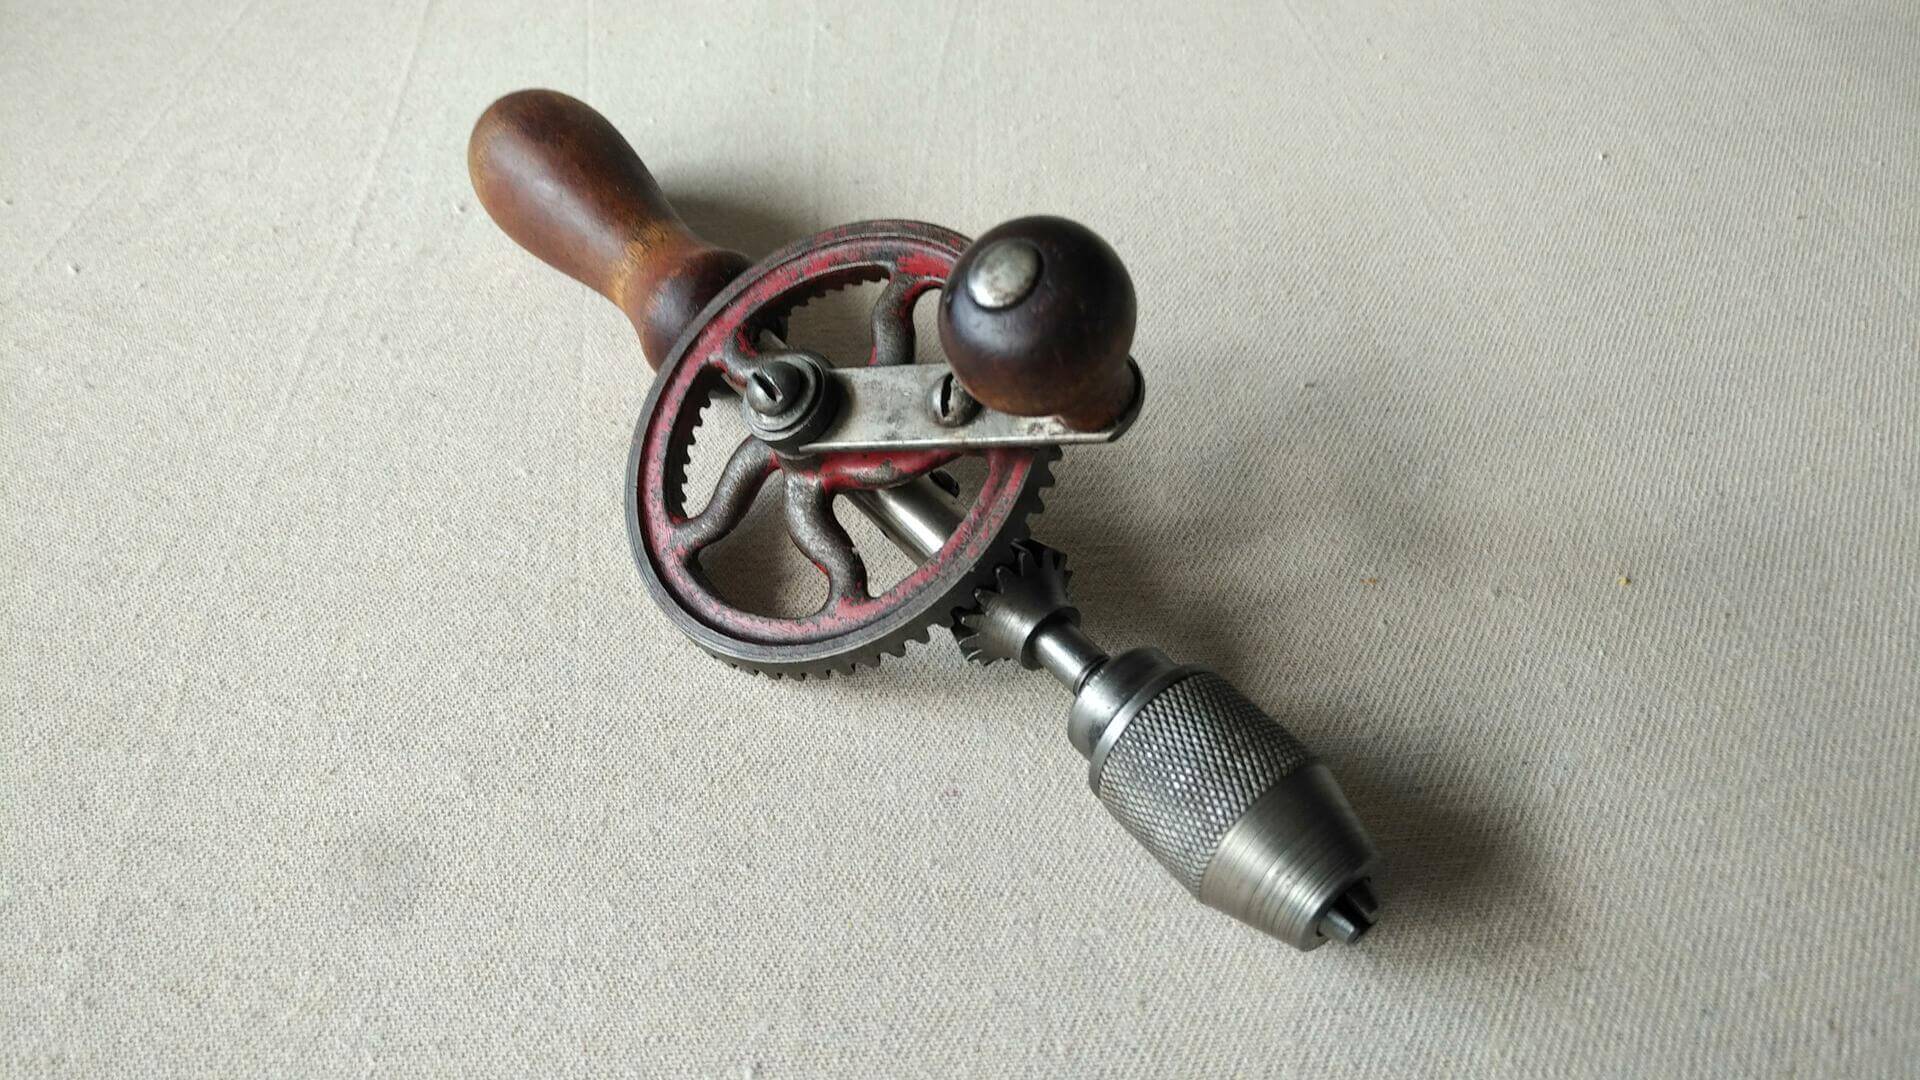 Vintage egg beater style manual woodworking push drill with the beautiful wooden handle 10 inches long. Antique collectible carpentry hand tools